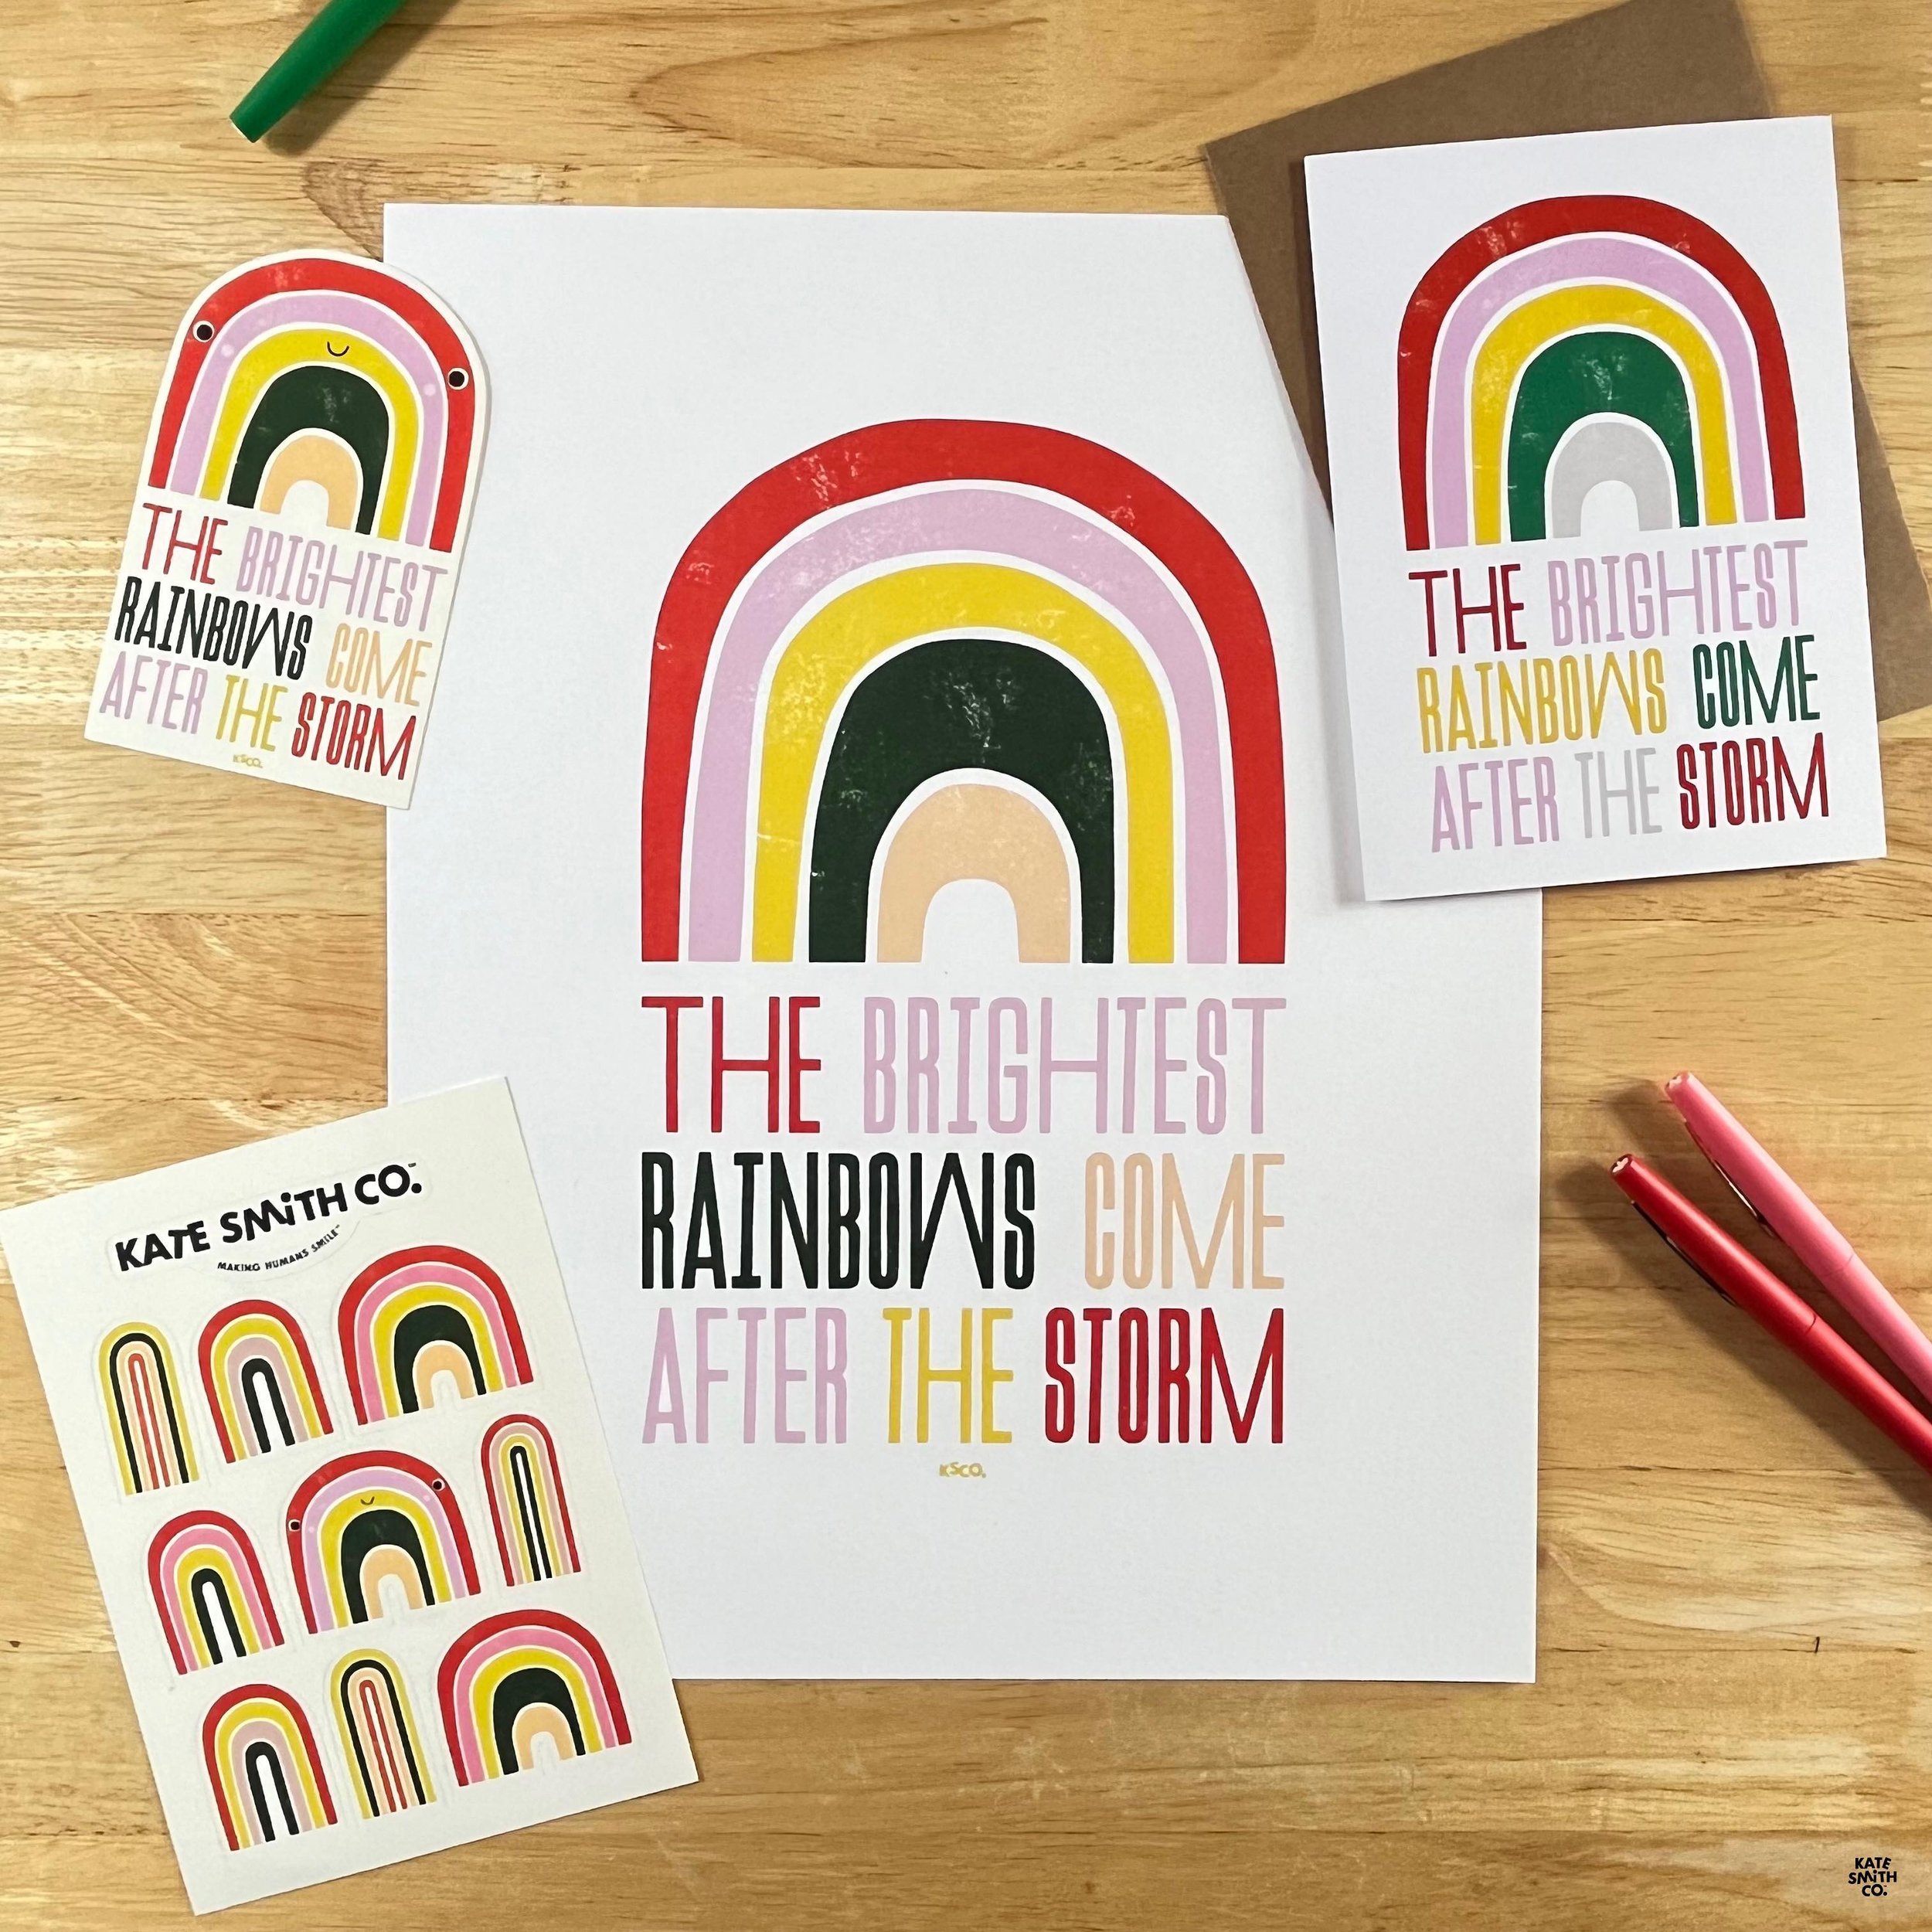 🌈🌈🌈 
〰️〰️〰️
Our biggest sale of the year ends tomorrow!
〰️〰️〰️
#katesmithco #makinghumanssmile #rainbow #artprint #greetingcards #stickers